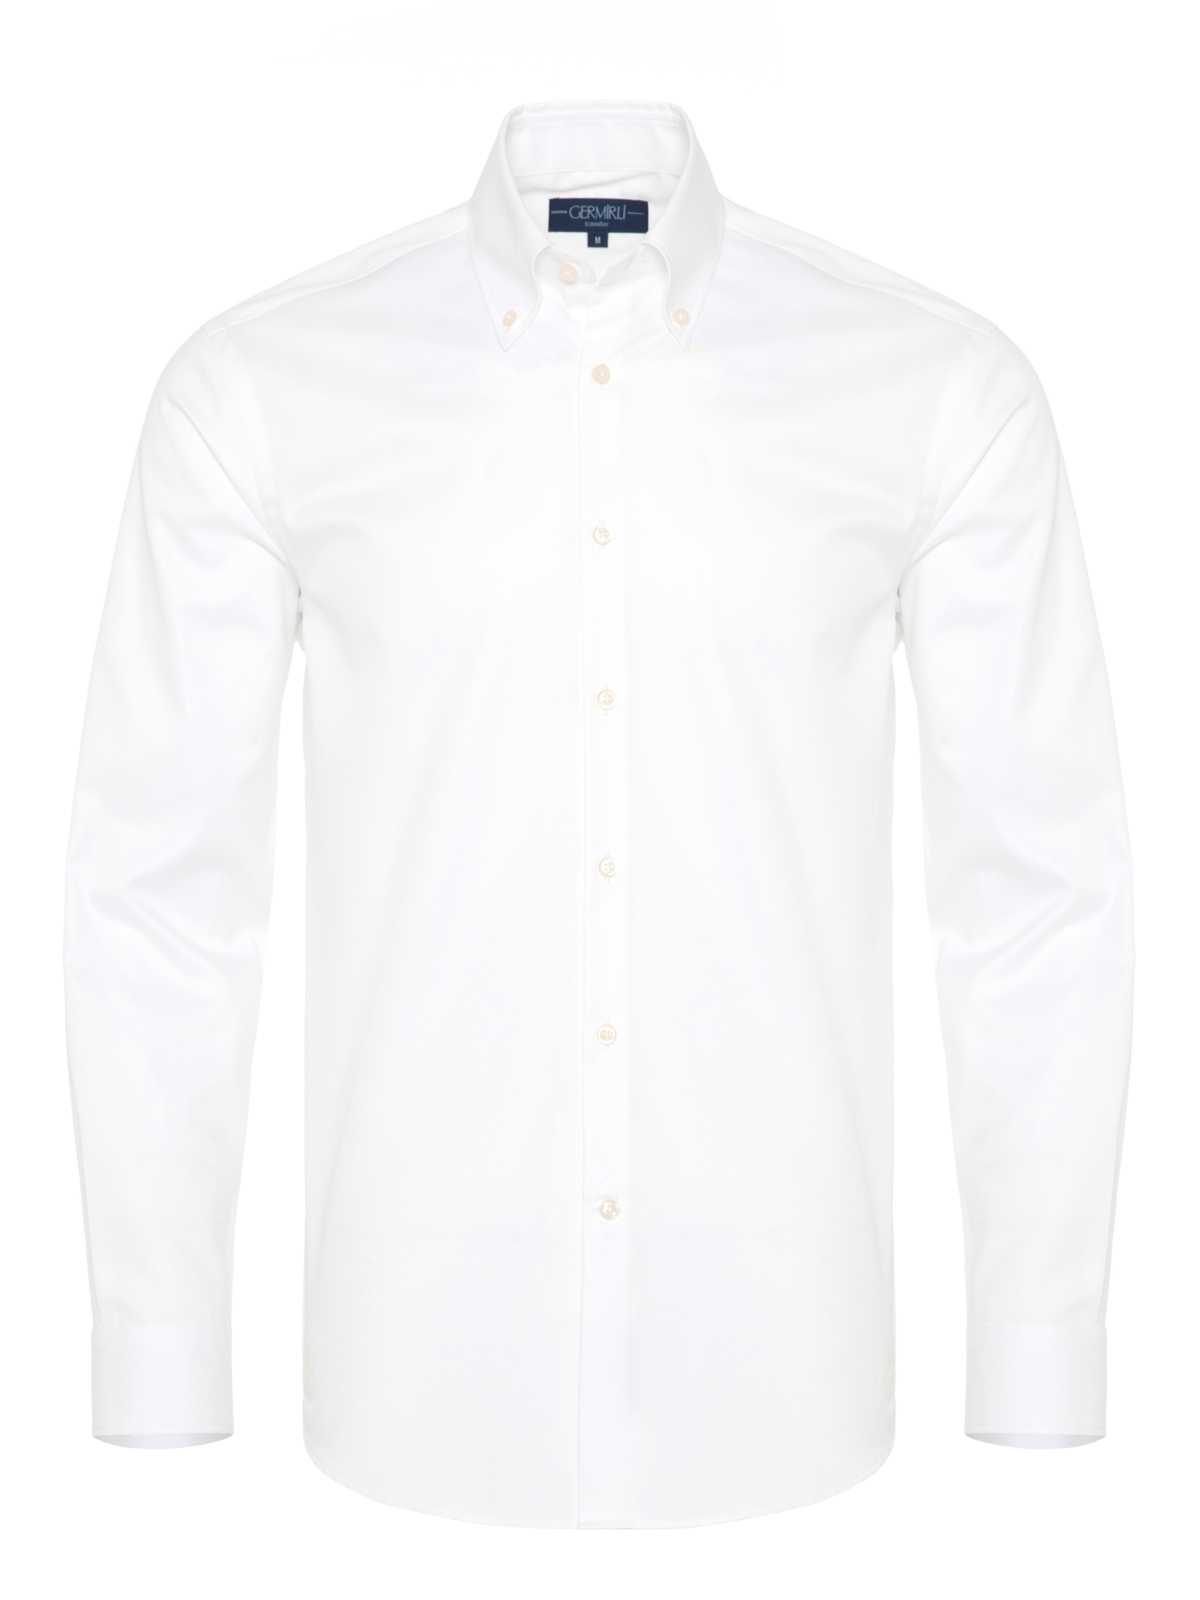 Germirli - Germirli X-Thermotech White Oxford Button Down Tailor Fit Shirt